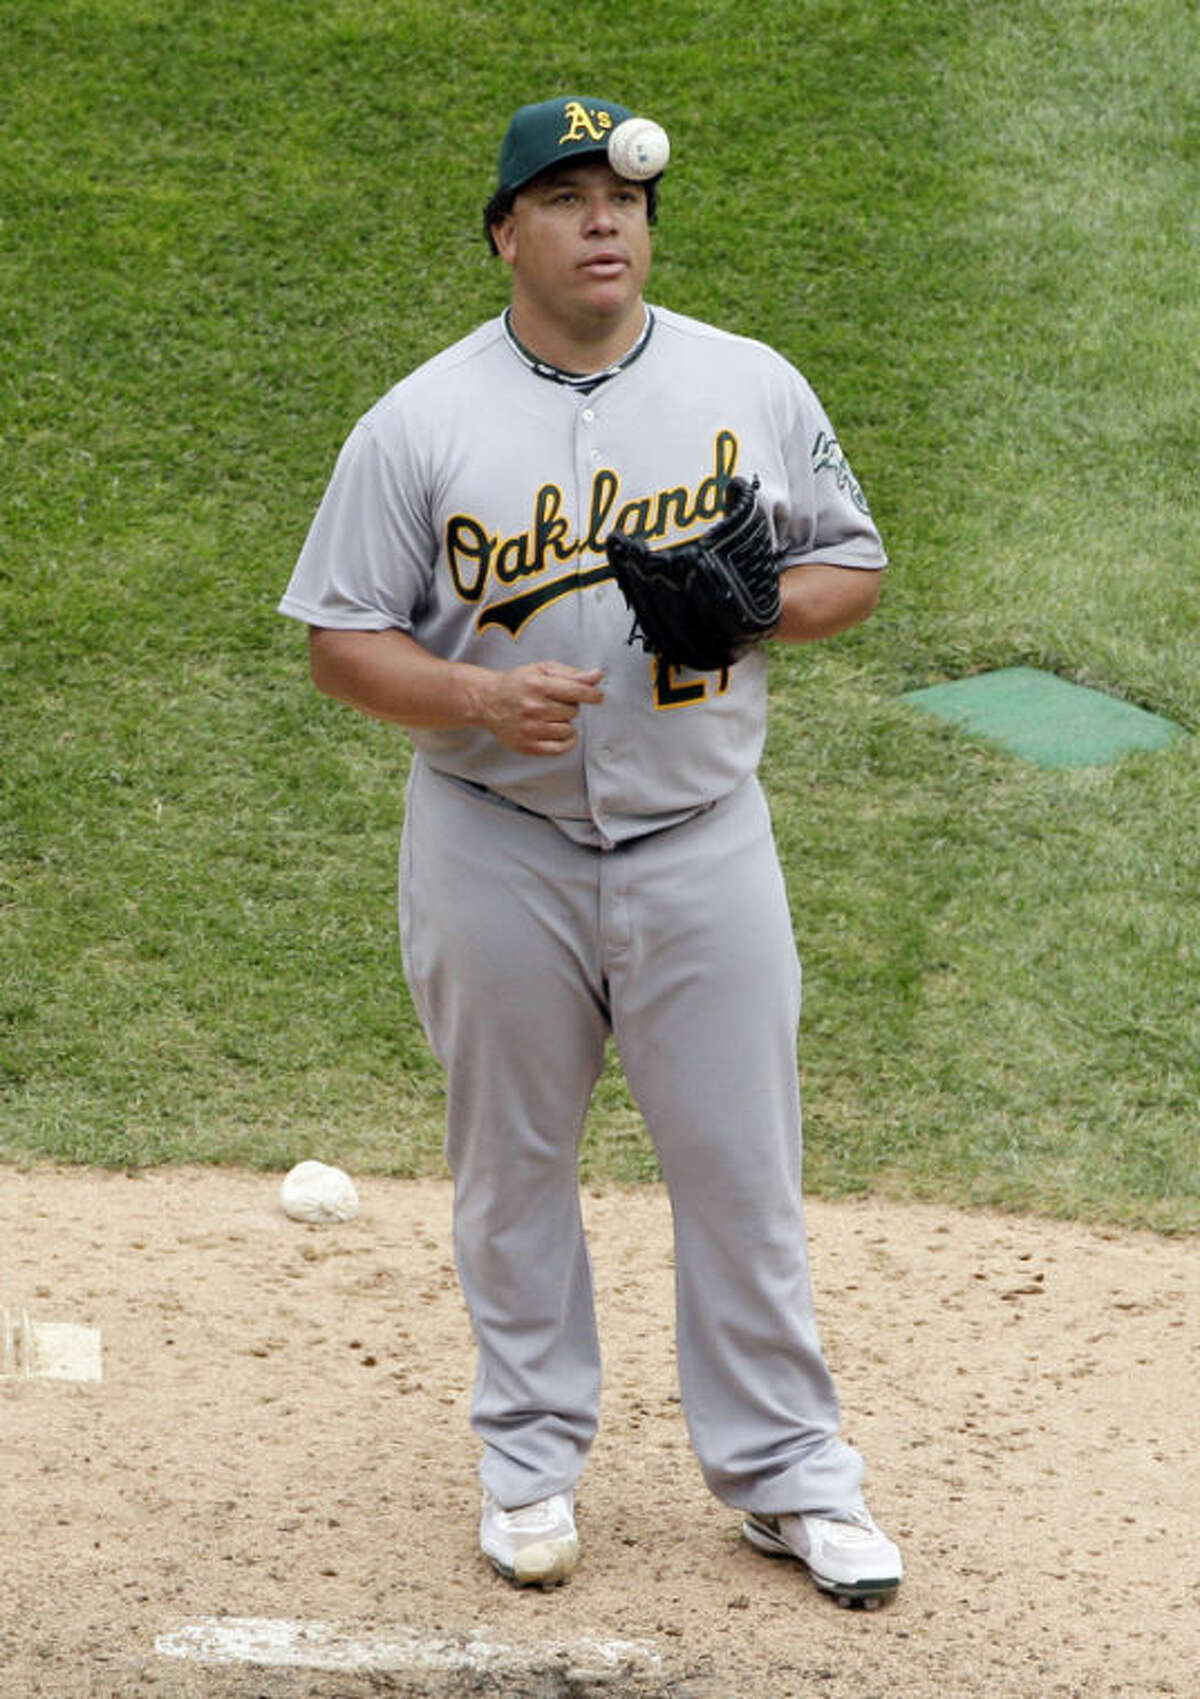 FILE - In this Aug. 12, 2012, file photo, Oakland Athletics starter Bartolo Colon tosses the ball after Chicago White Sox's Gordon Beckham hit a two-run single during the sixth inning of a baseball game in Chicago. Major League Baseball says it is "extremely disappointed" about a new report that says records from an anti-aging clinic in the Miami area link Alex Rodriguez and other players to the purchase of performance-enhancing drugs. The Miami New Times said in a story Tuesday, Jan. 29, 2013, that it had obtained files through an employee at a recently closed clinic called Biogenesis. Other players named by the publication as appearing in the records include Colon, Melky Cabrera, Gio Gonzalez and Nelson Cruz.(AP Photo/Nam Y. Huh, File)